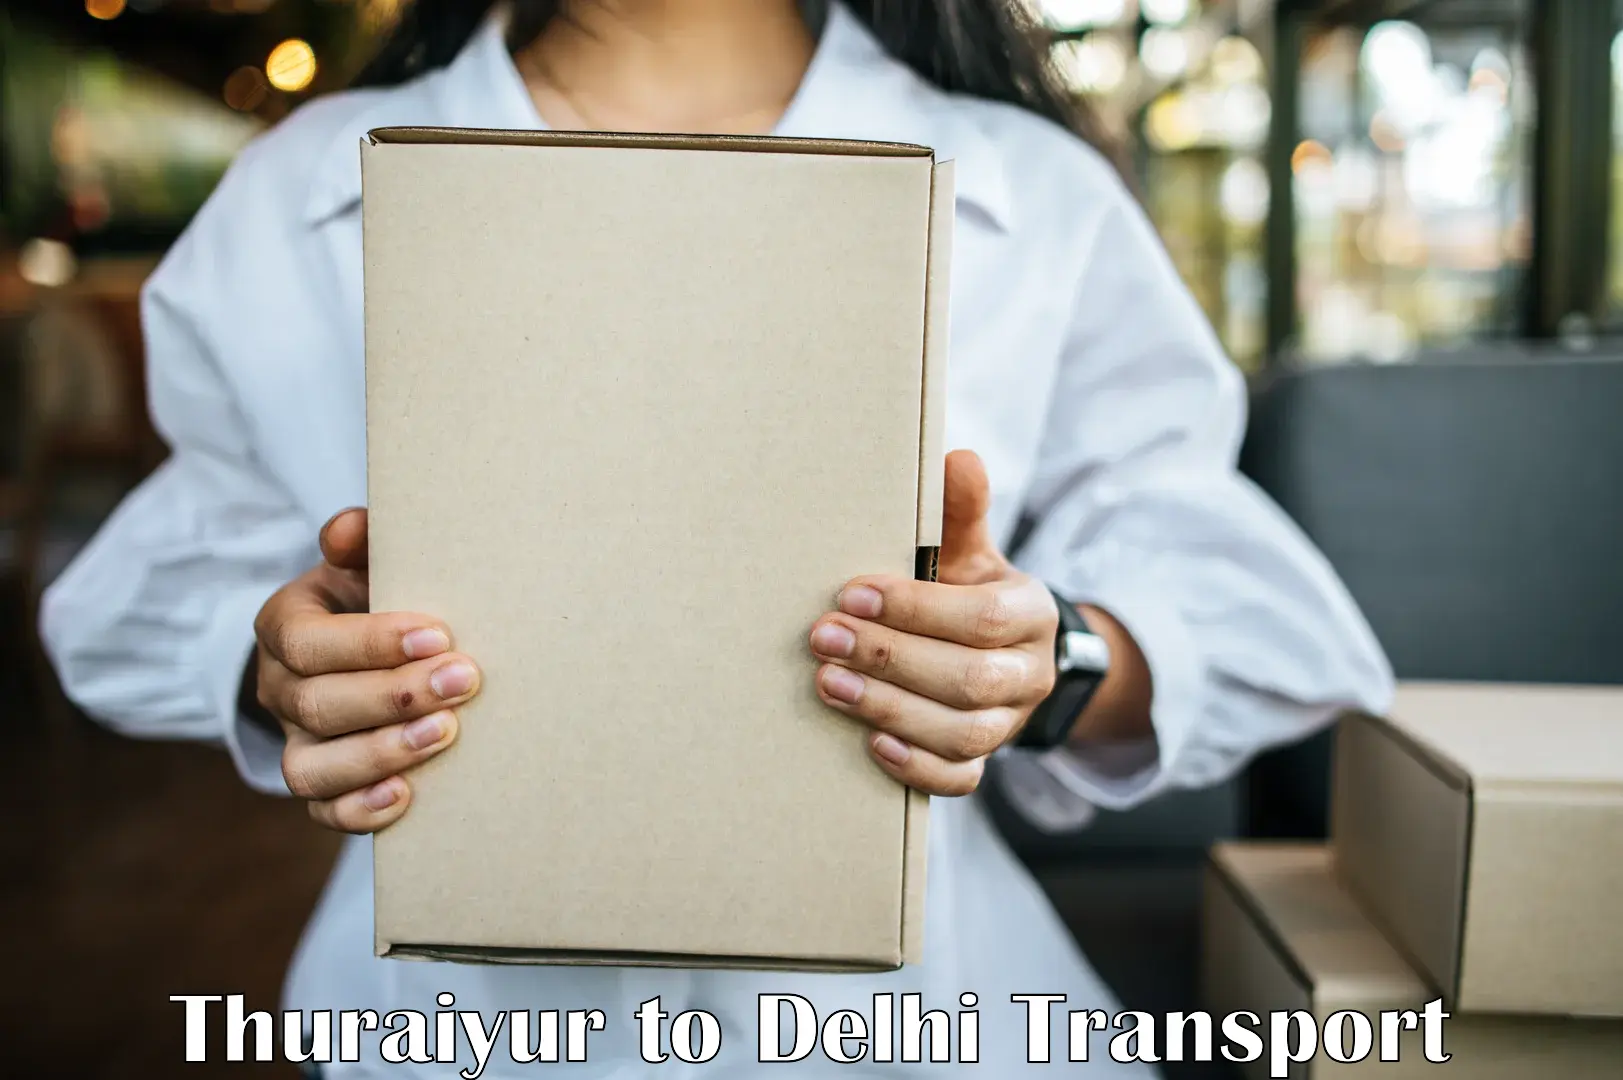 Container transport service Thuraiyur to Delhi Technological University DTU